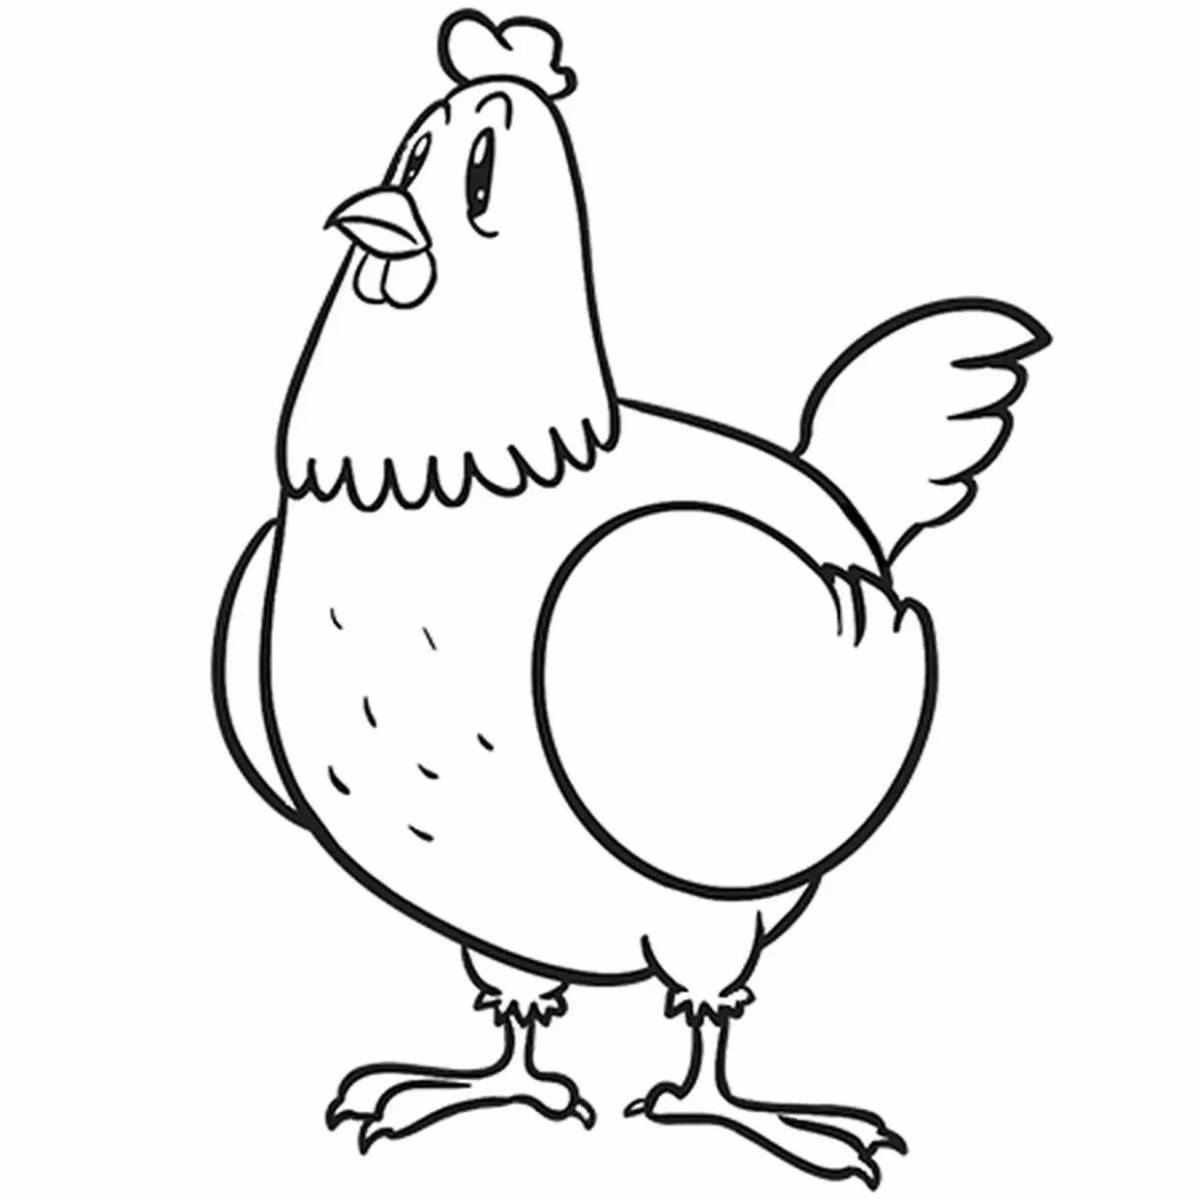 Fun chicken drawing for kids